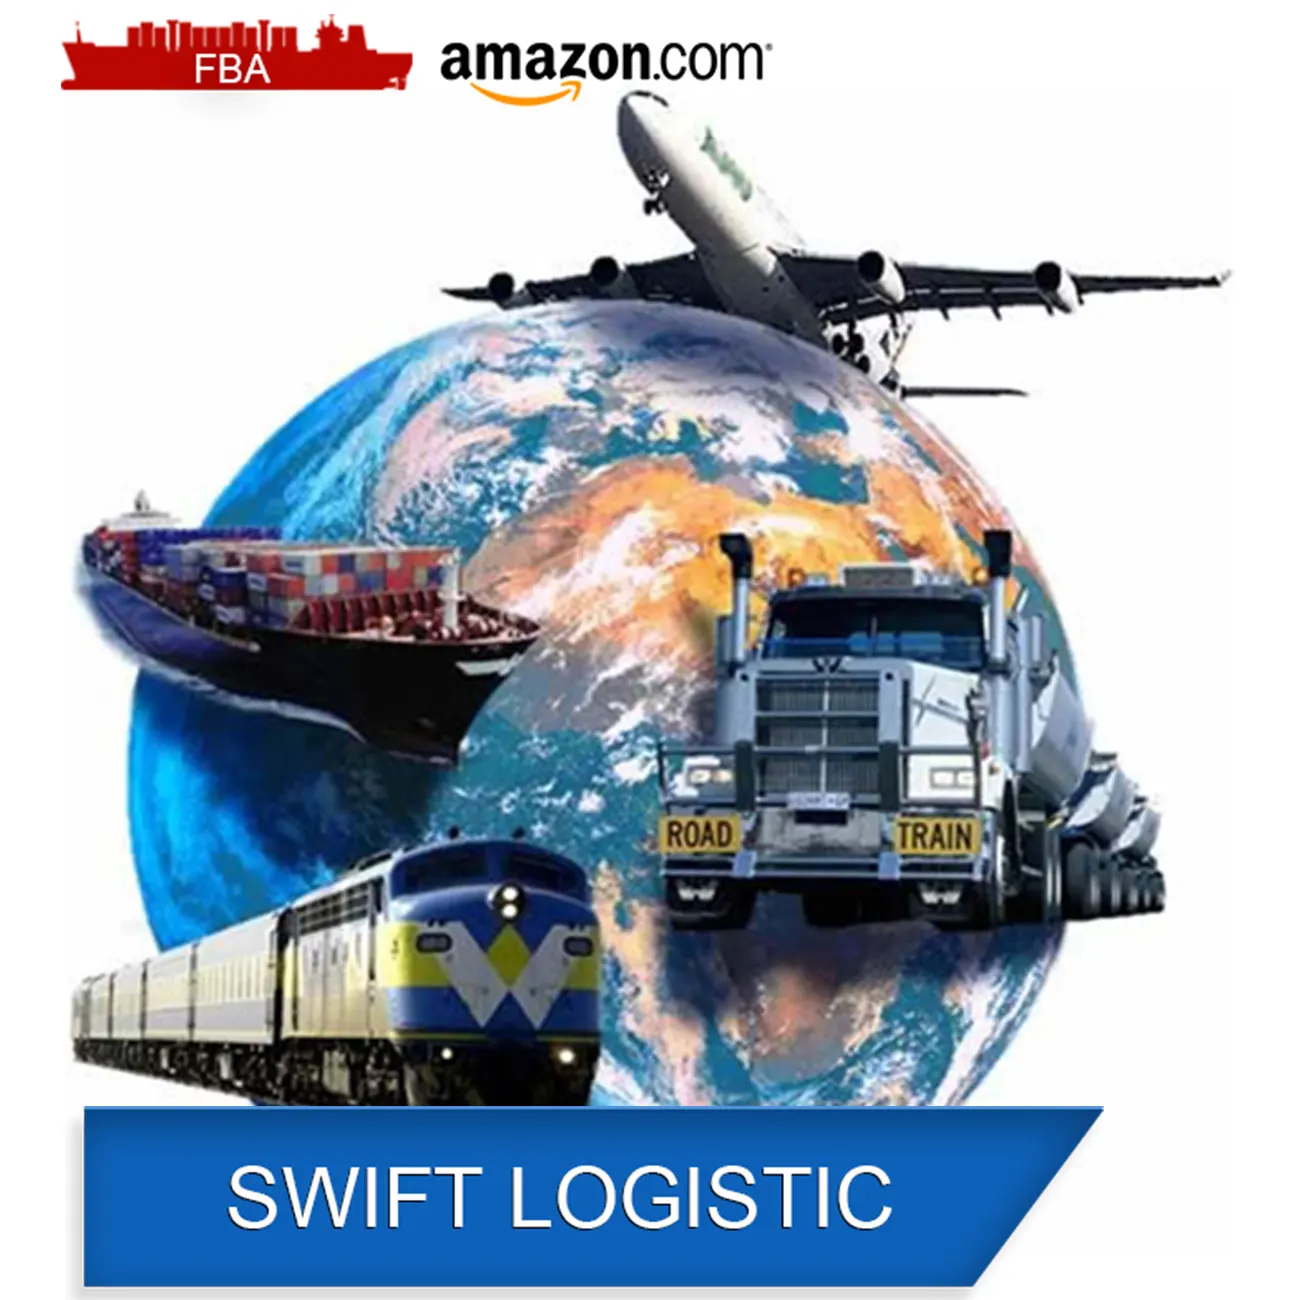 Amazon Fba Door to Door Delivery Service Fba Freight Forwarder International Air Freight Rates China Shipping Agent to USA